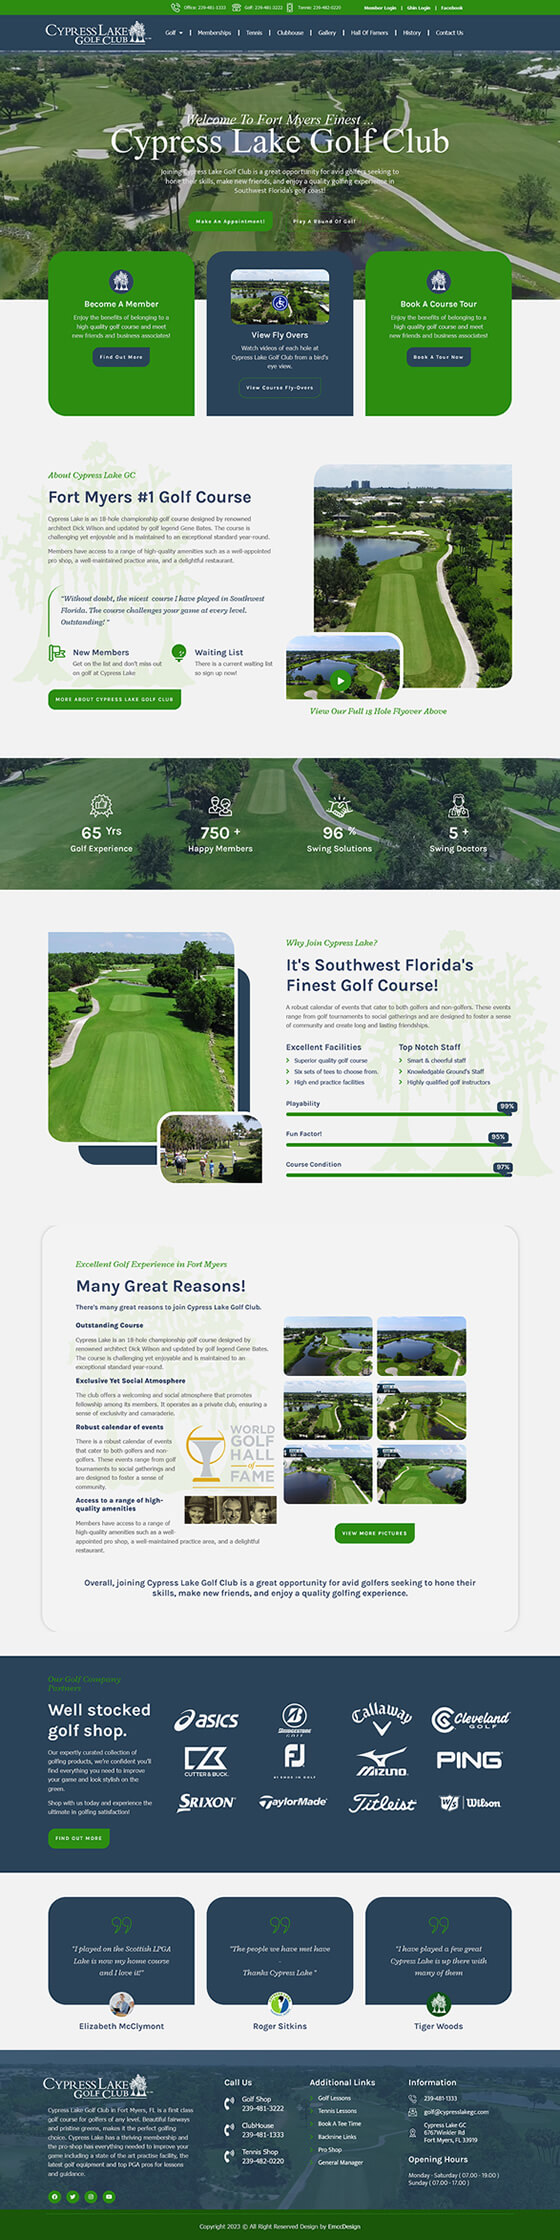 Cypress-lake-golf-course-private-southwest-Florida